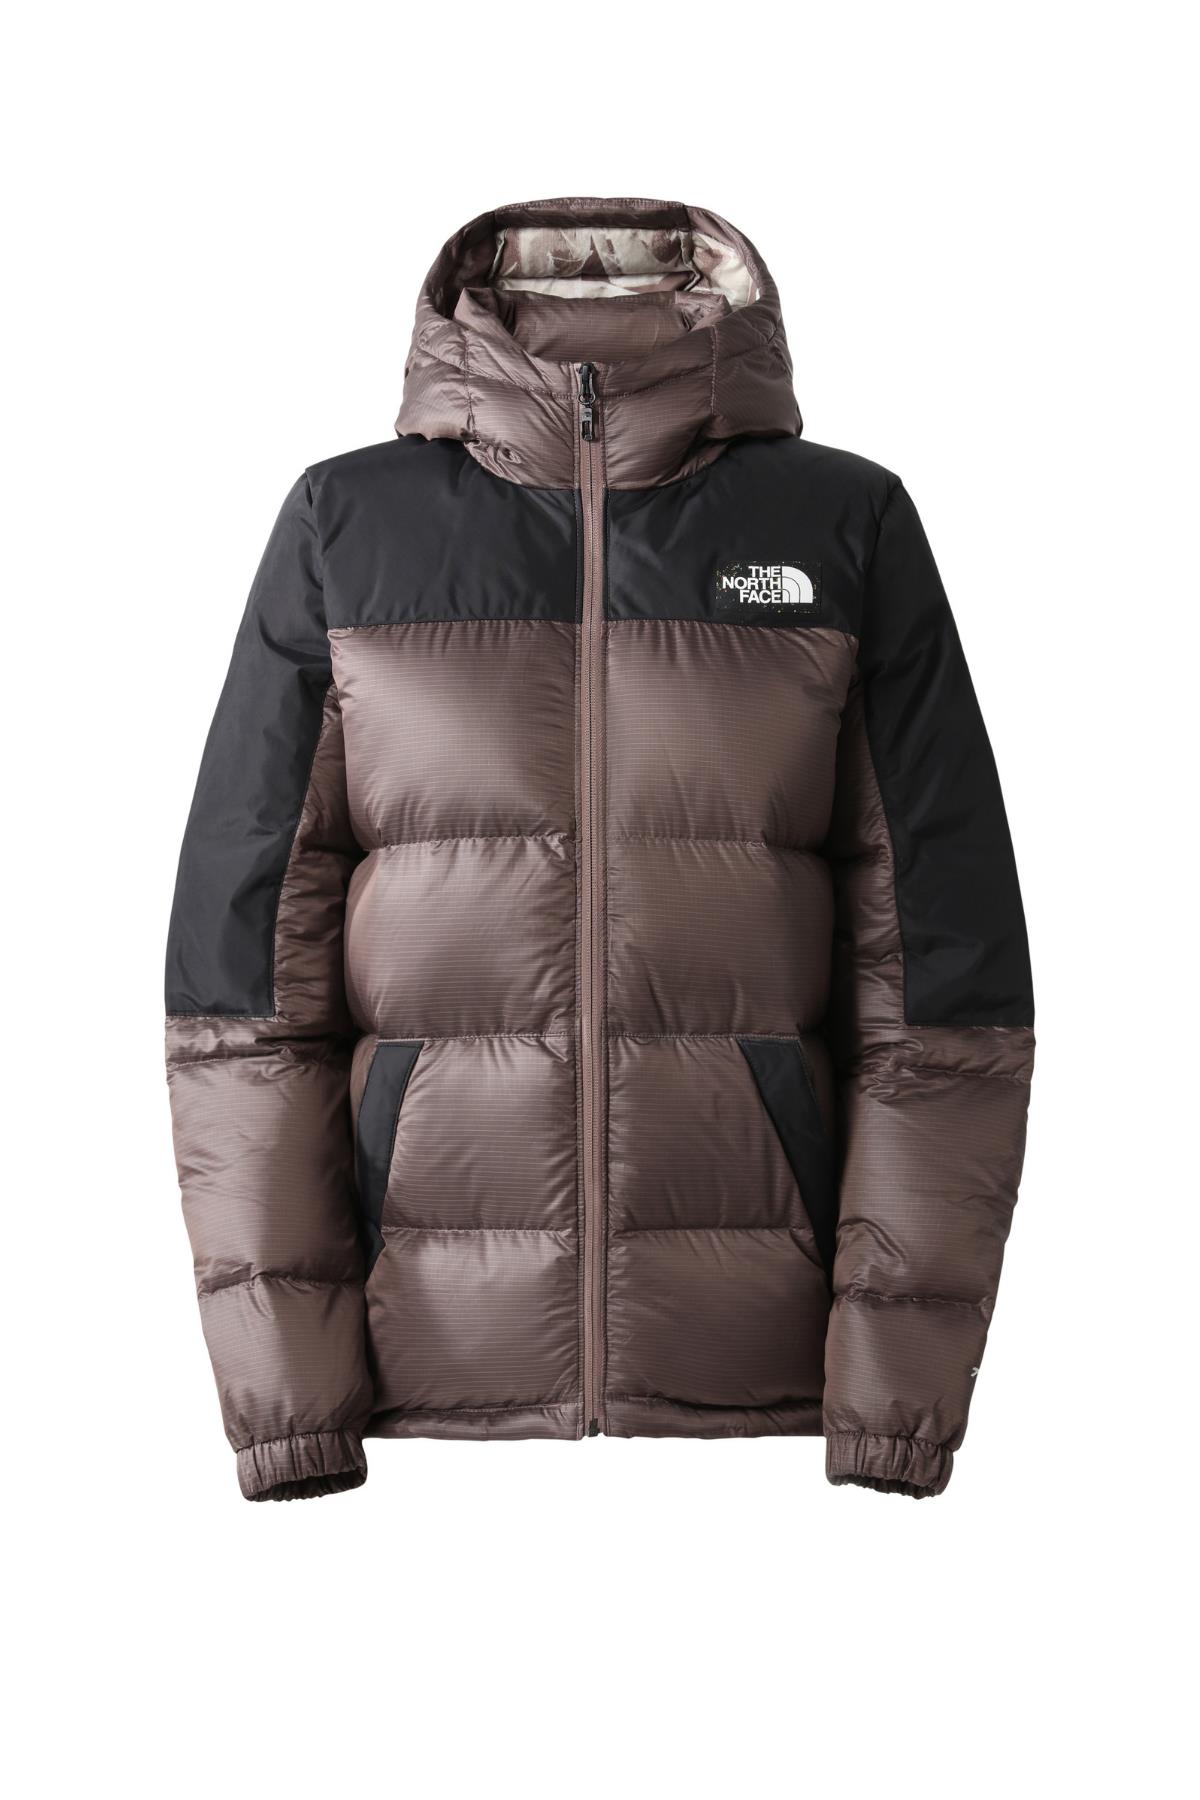 The North Face Dıablo Recycled Down Mont Kahverengi/Siyah